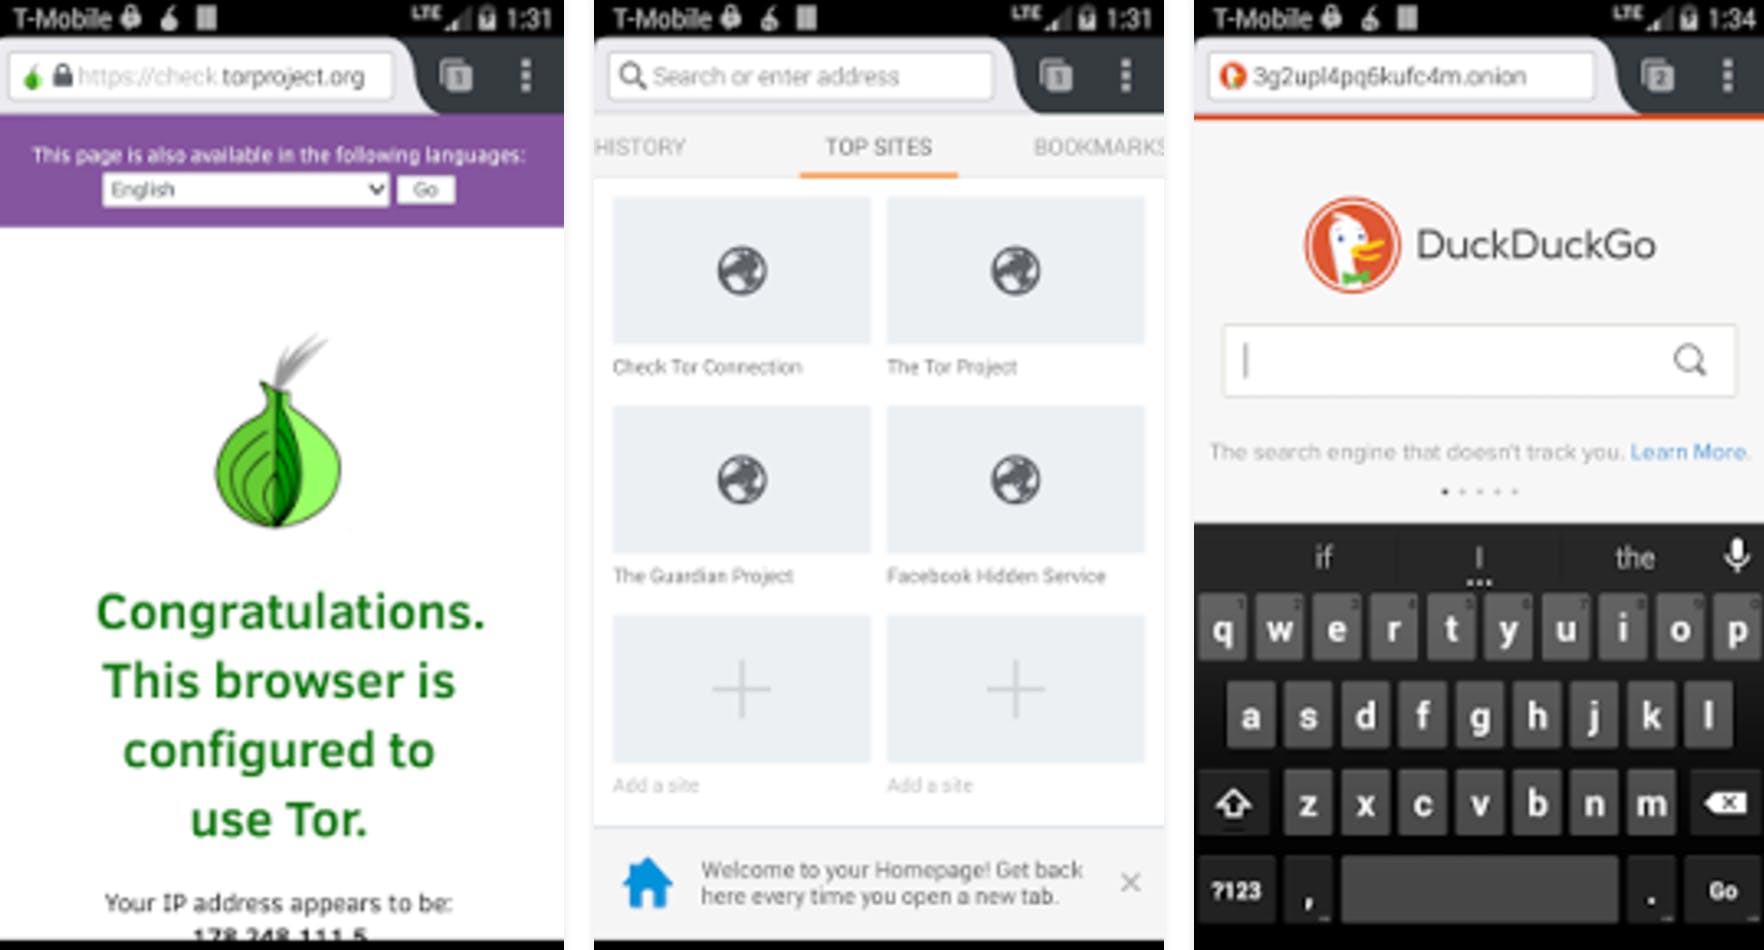 android security app : Orfox